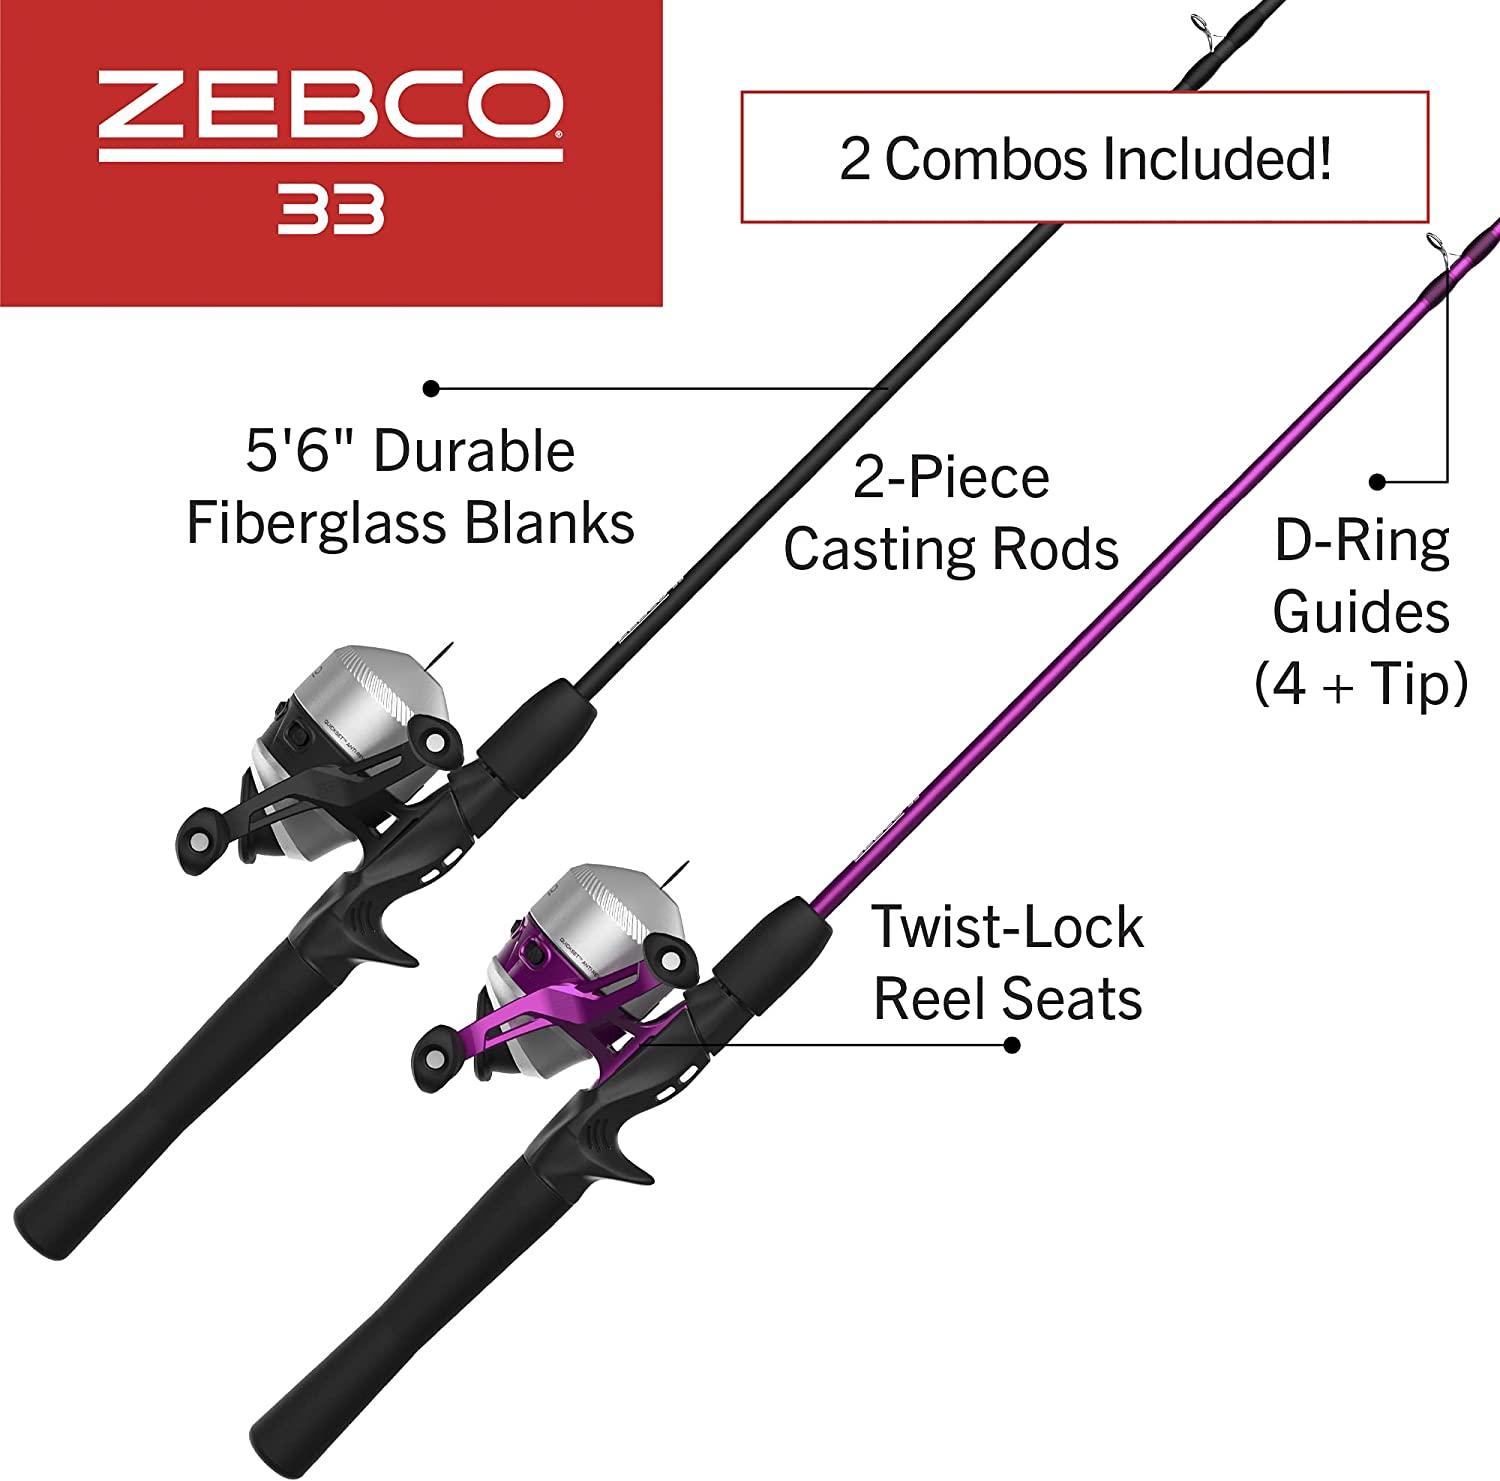  Compatible with Zebco RODS REELS LURES BASS FISHING BOAT CARPET  DECALS GRAPHICS BONUS DECAL!!! (Dimensions: 8) : Handmade Products